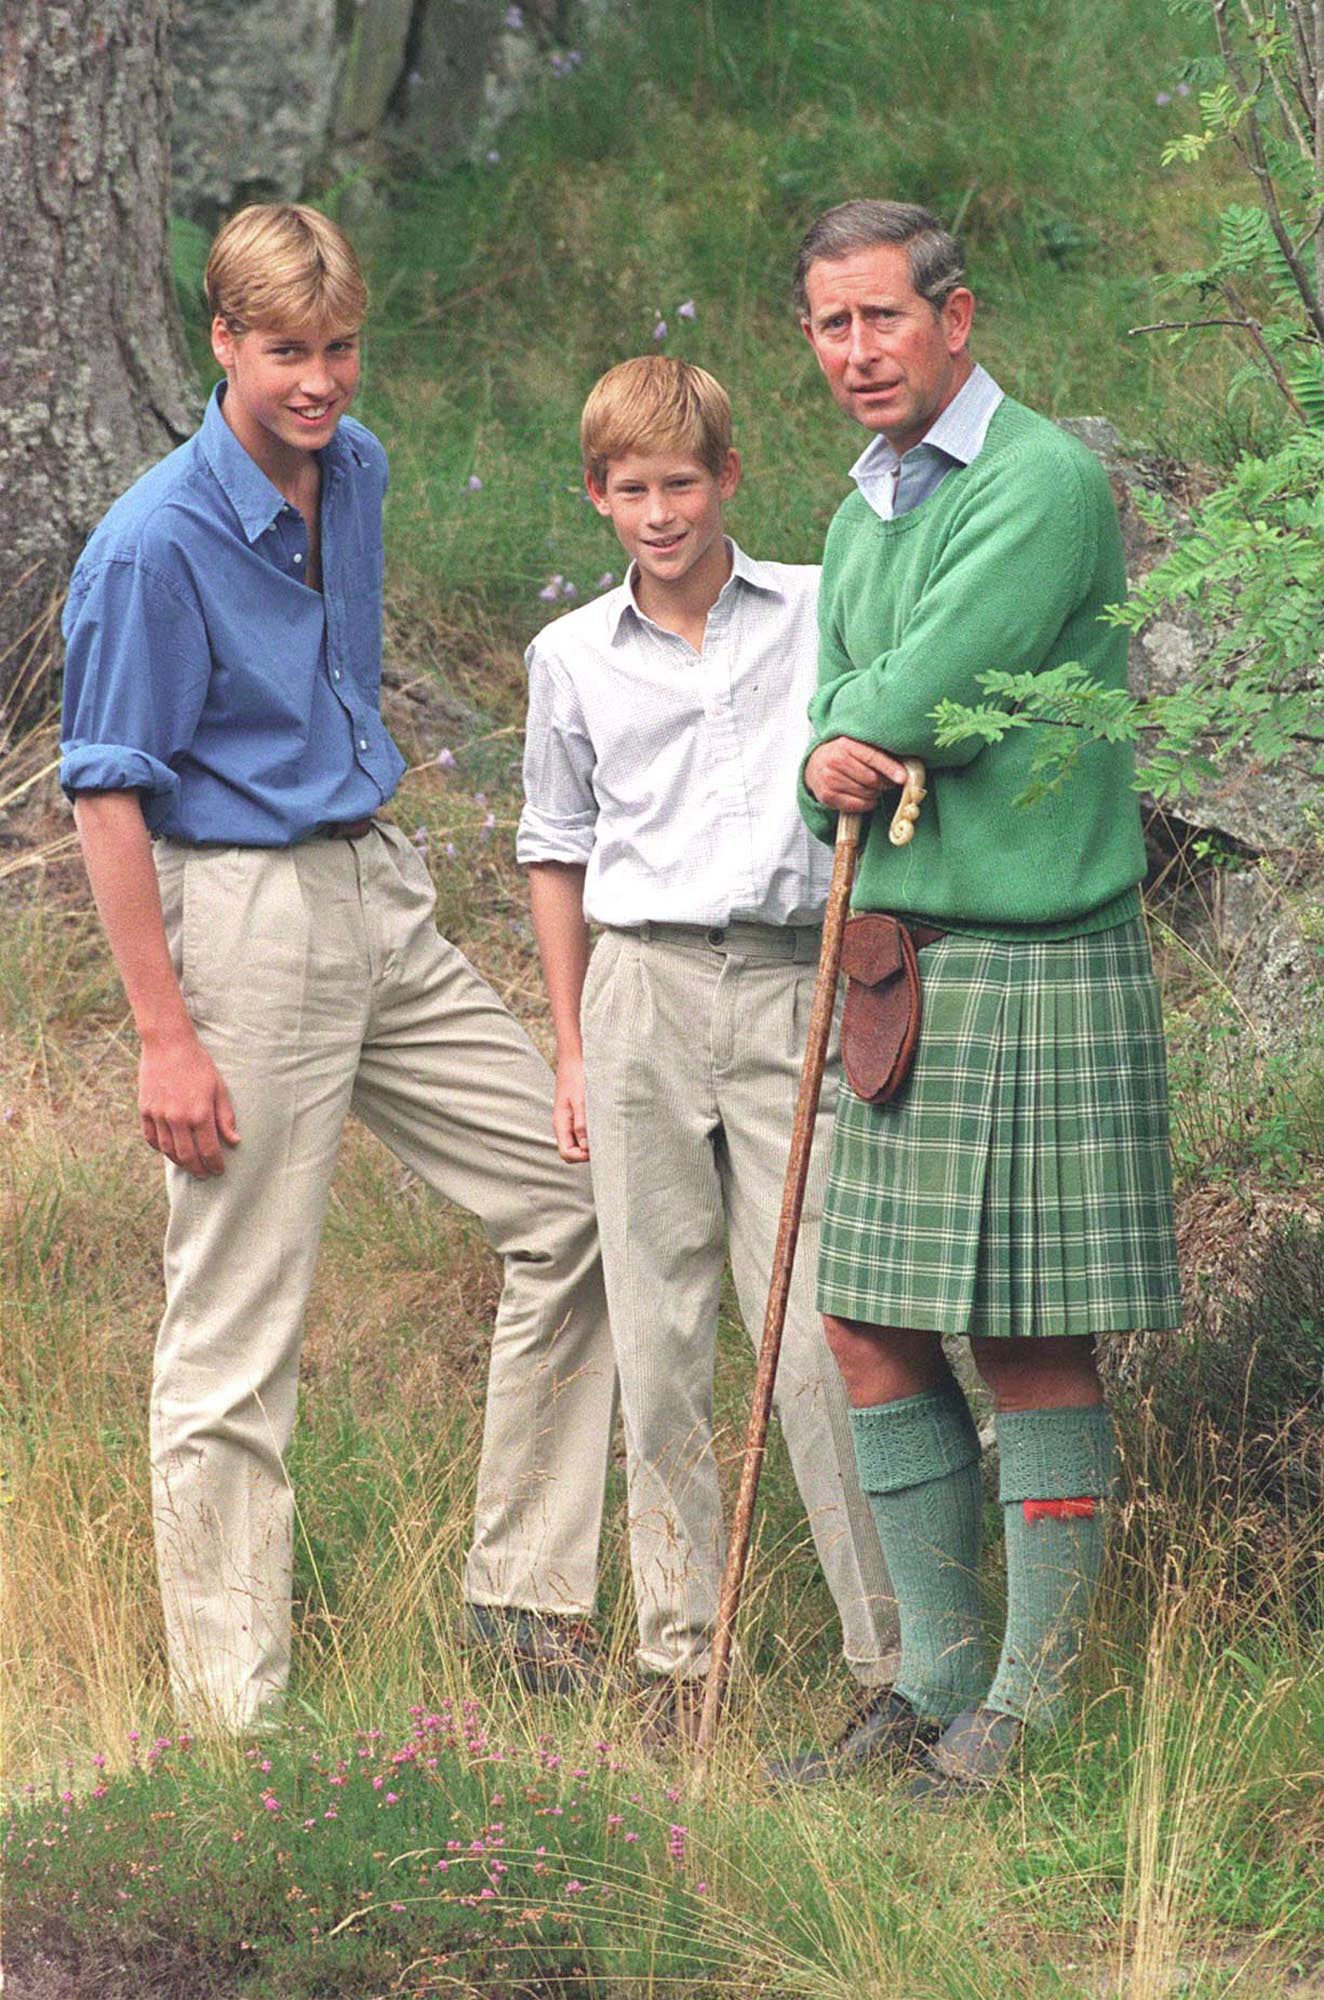 Prince William, Prince Harry, and Prince Charles at Balmoral, Scotland, on August 16, 1997 | Source: Getty Images